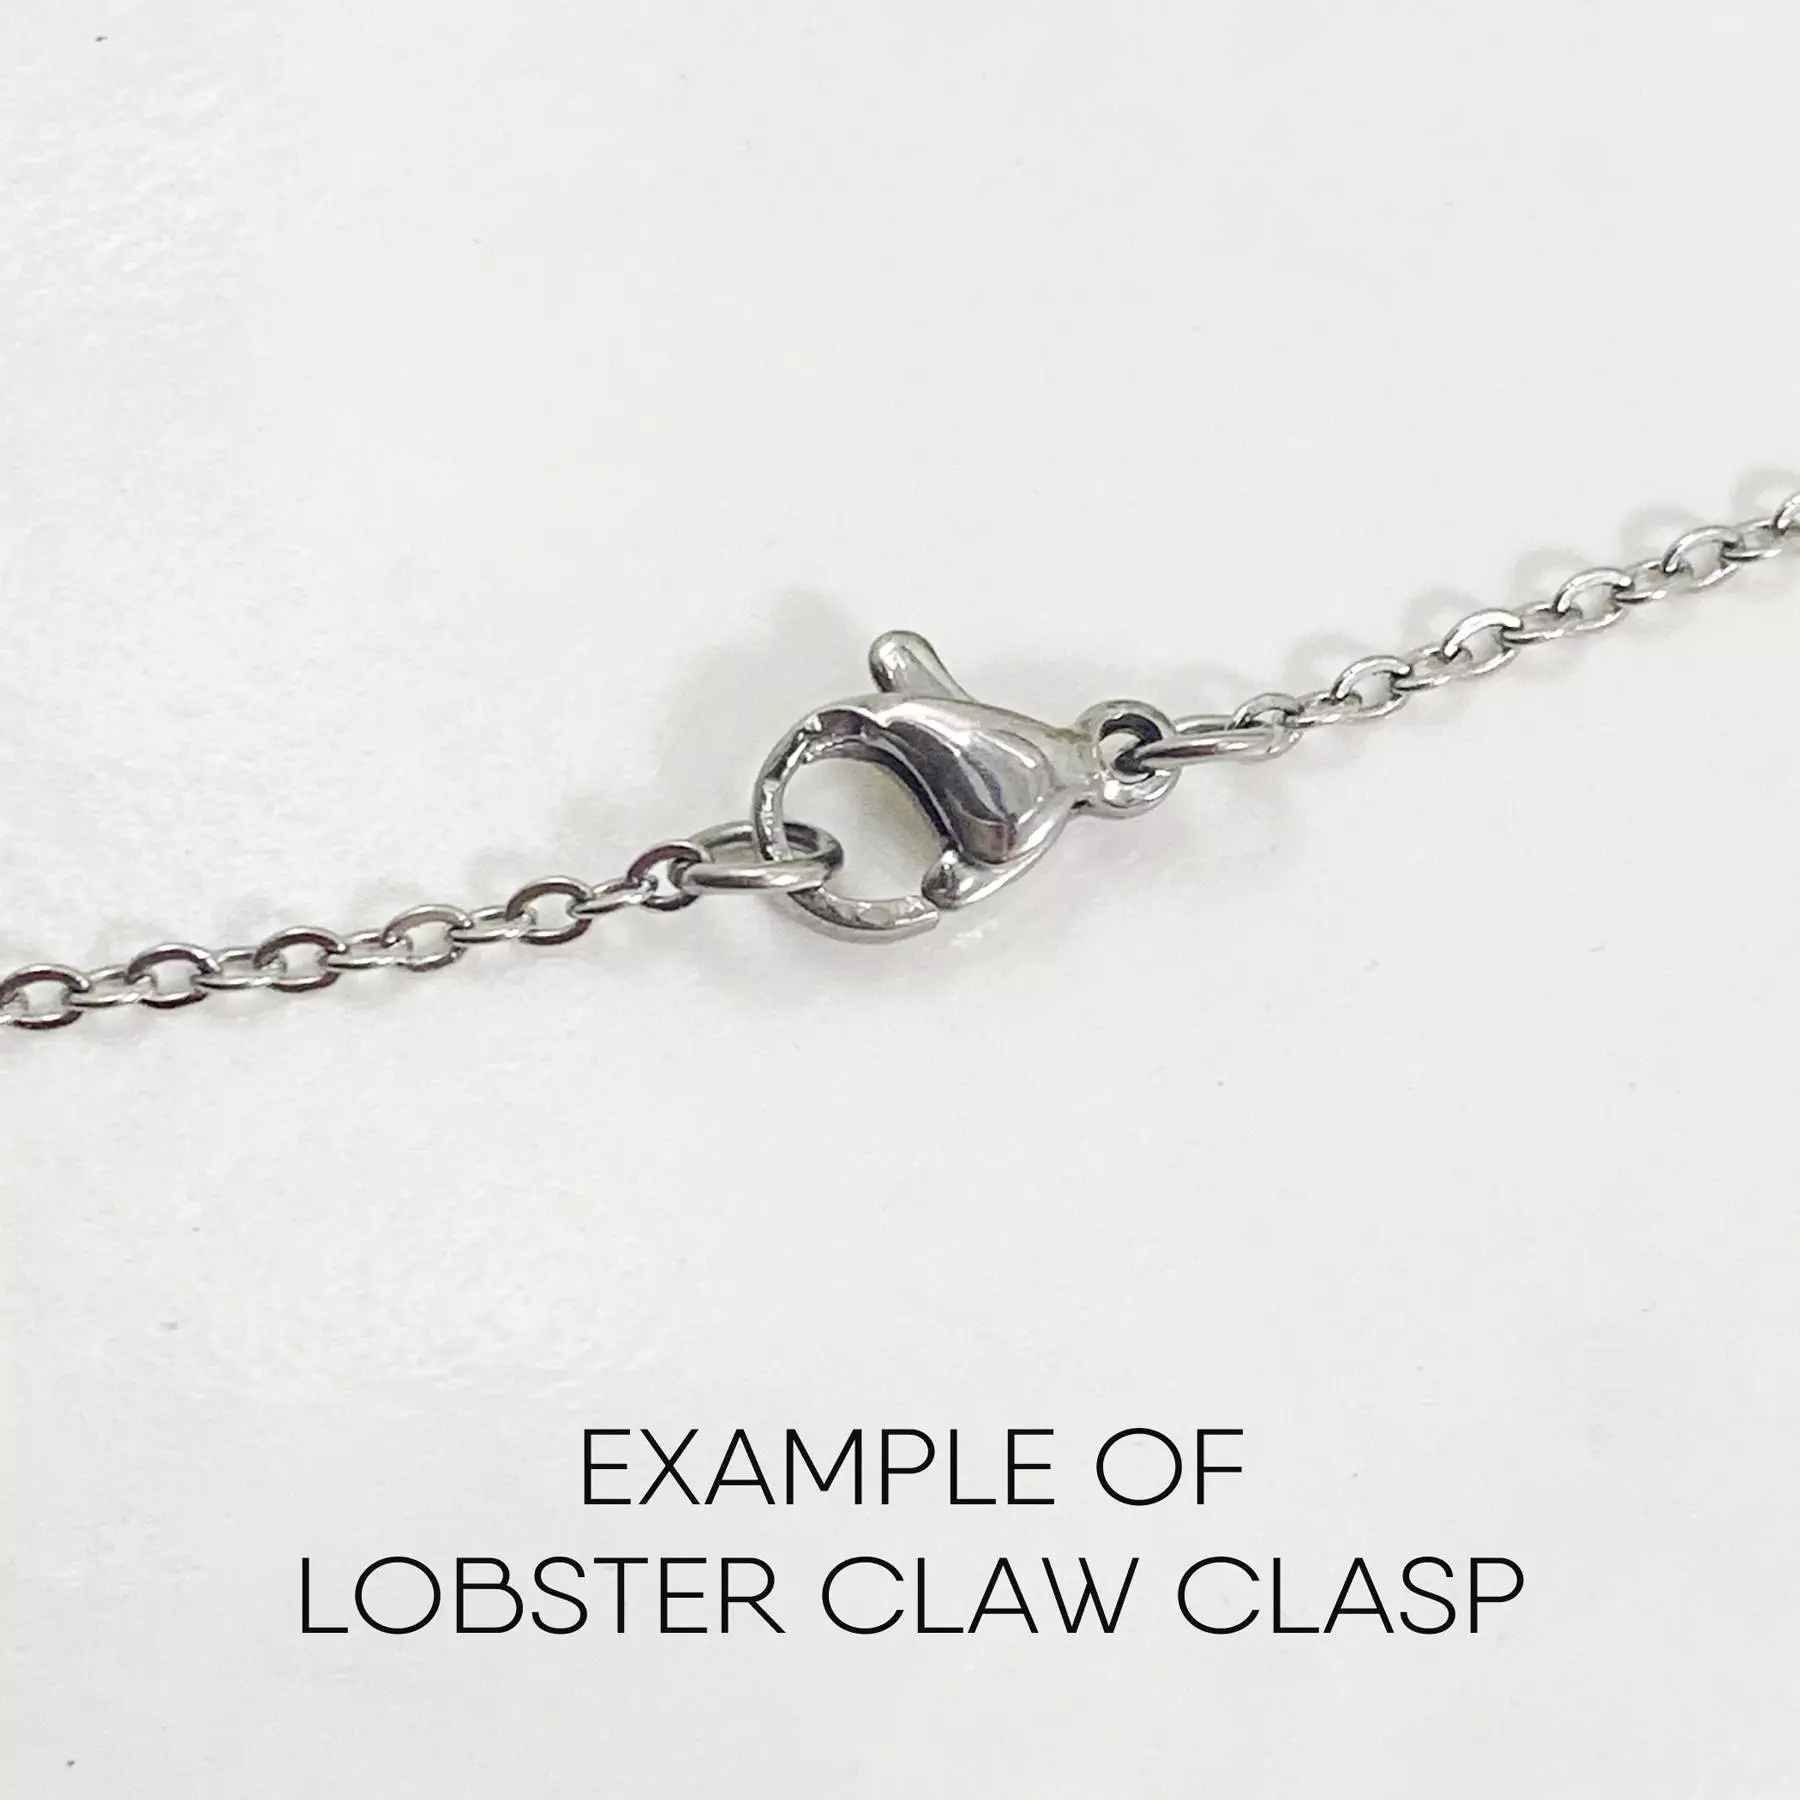 1 Lobster claw clasp